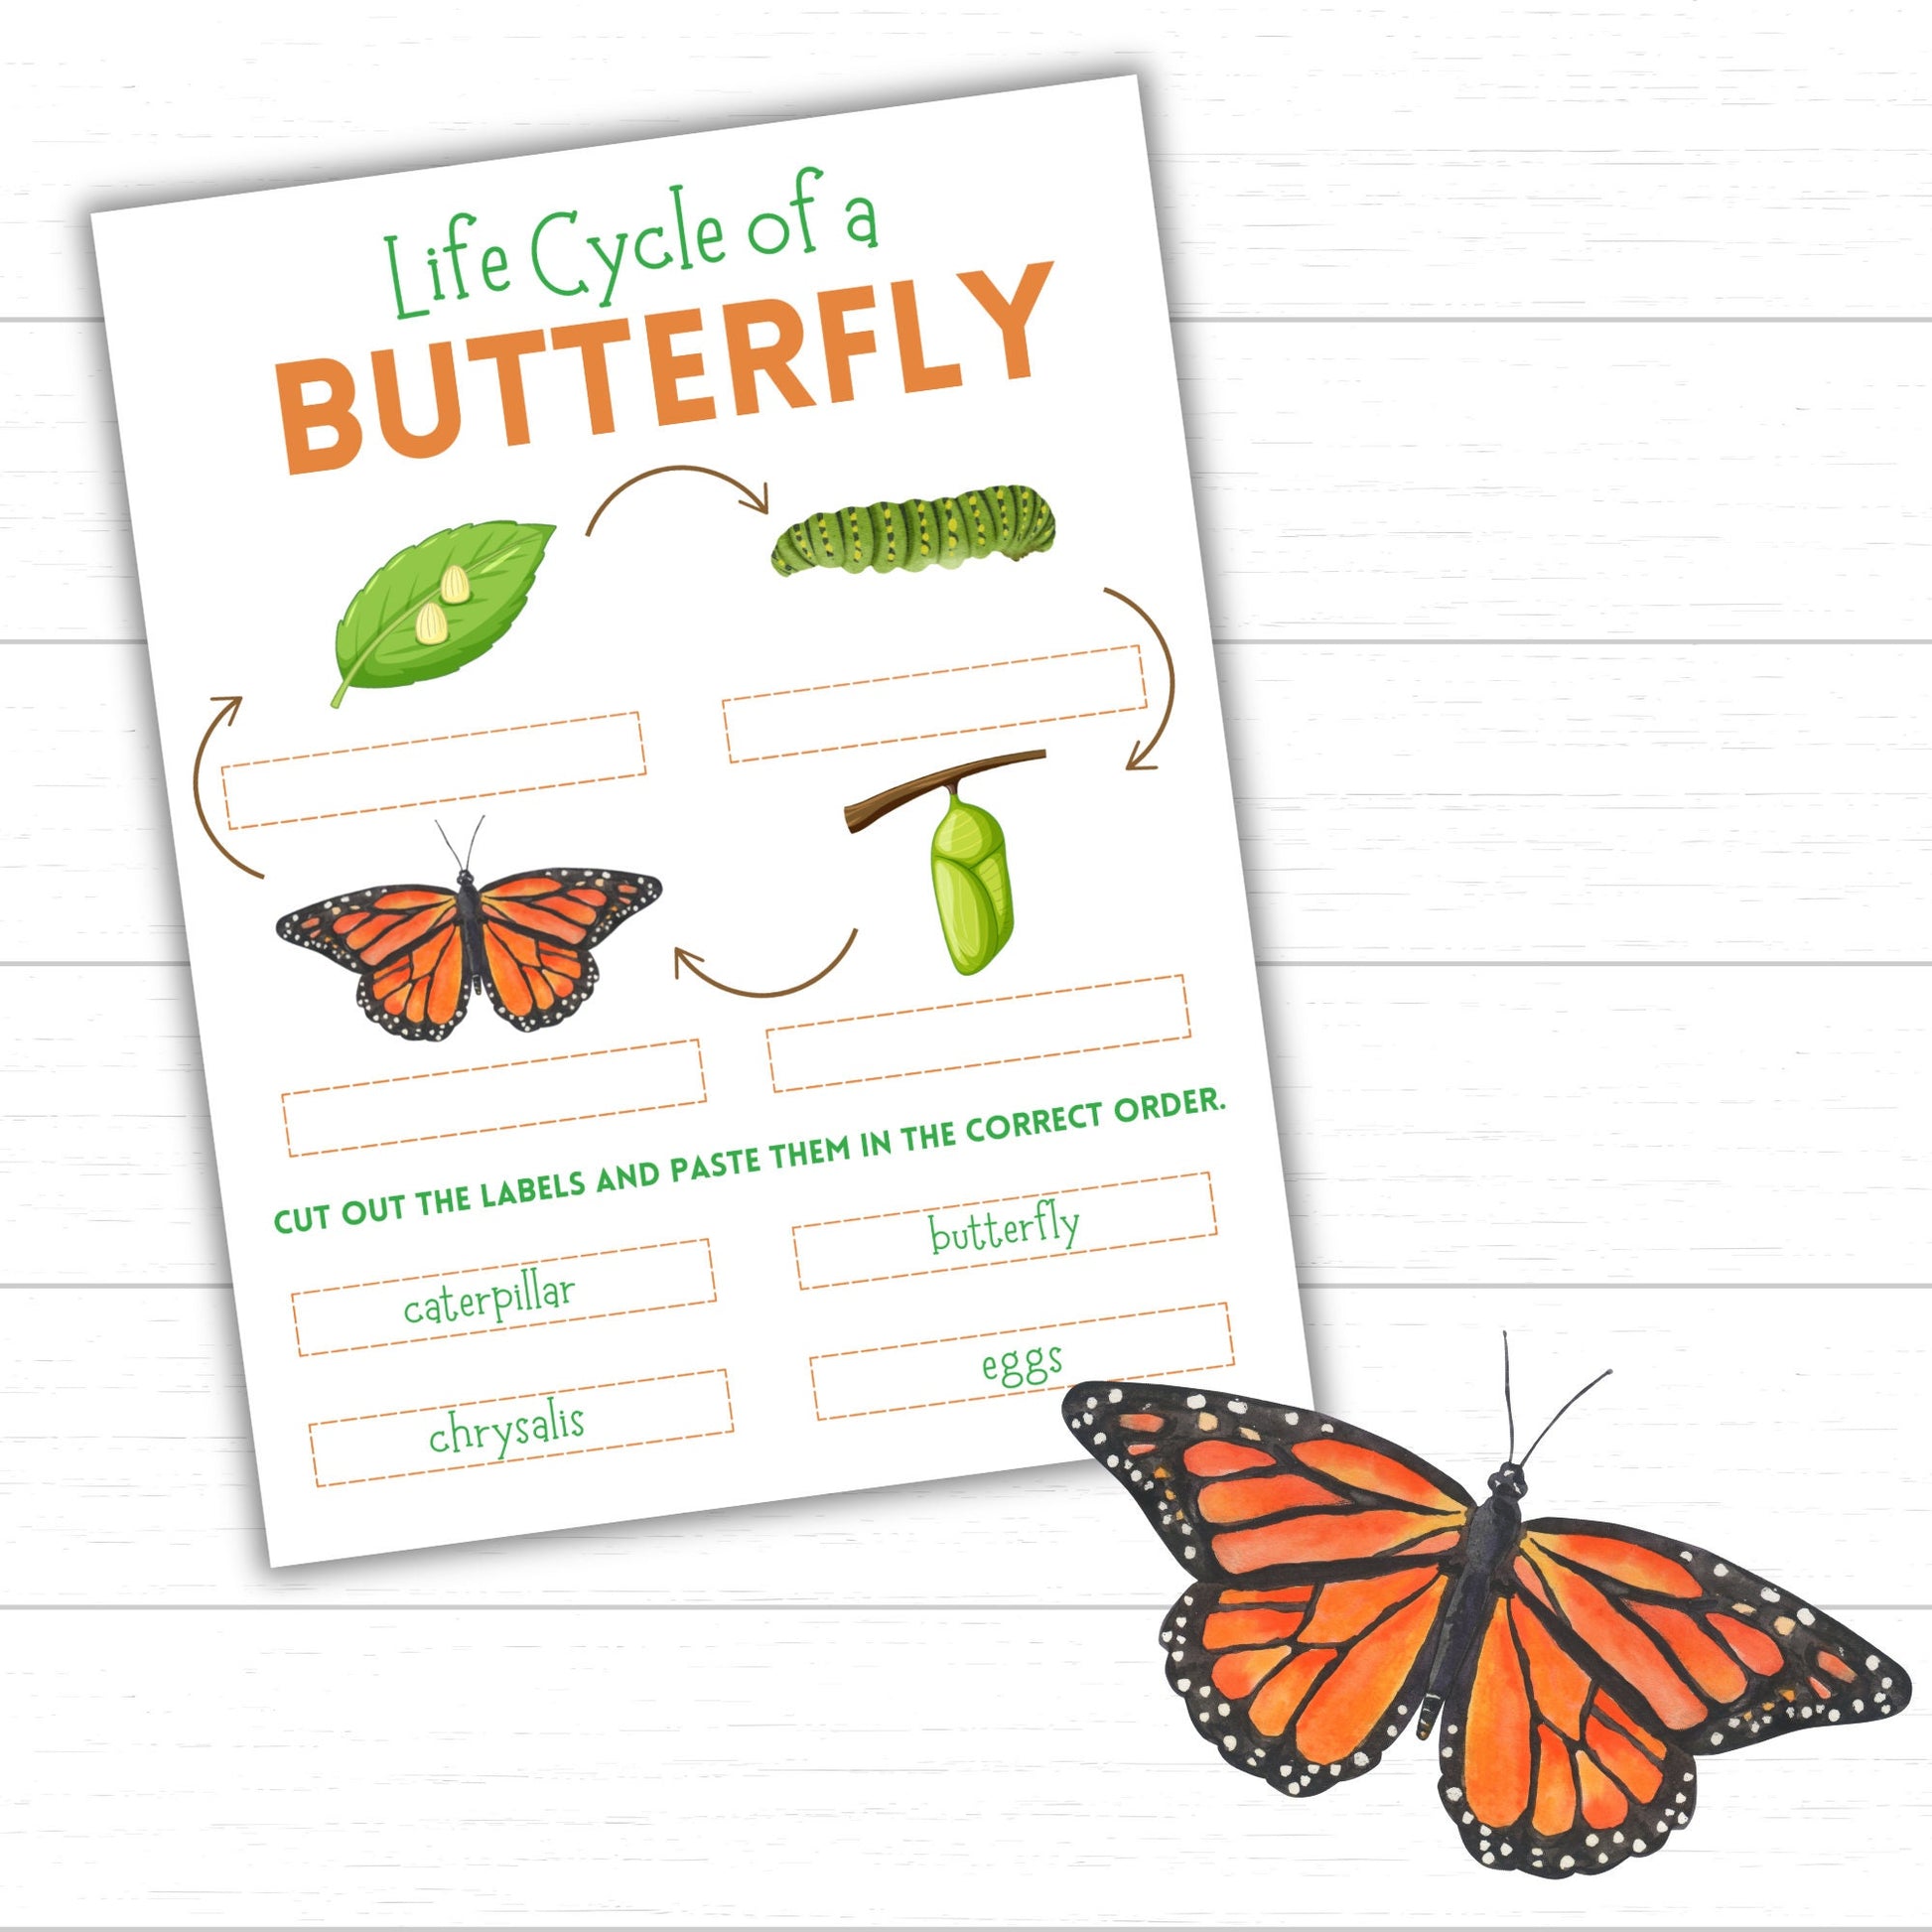 Life Cycle of a Butterfly, Printable Butterfly Life Cycle, Life Cycle Worksheets, Printable Life Cycles, Life Cycle of an Insect